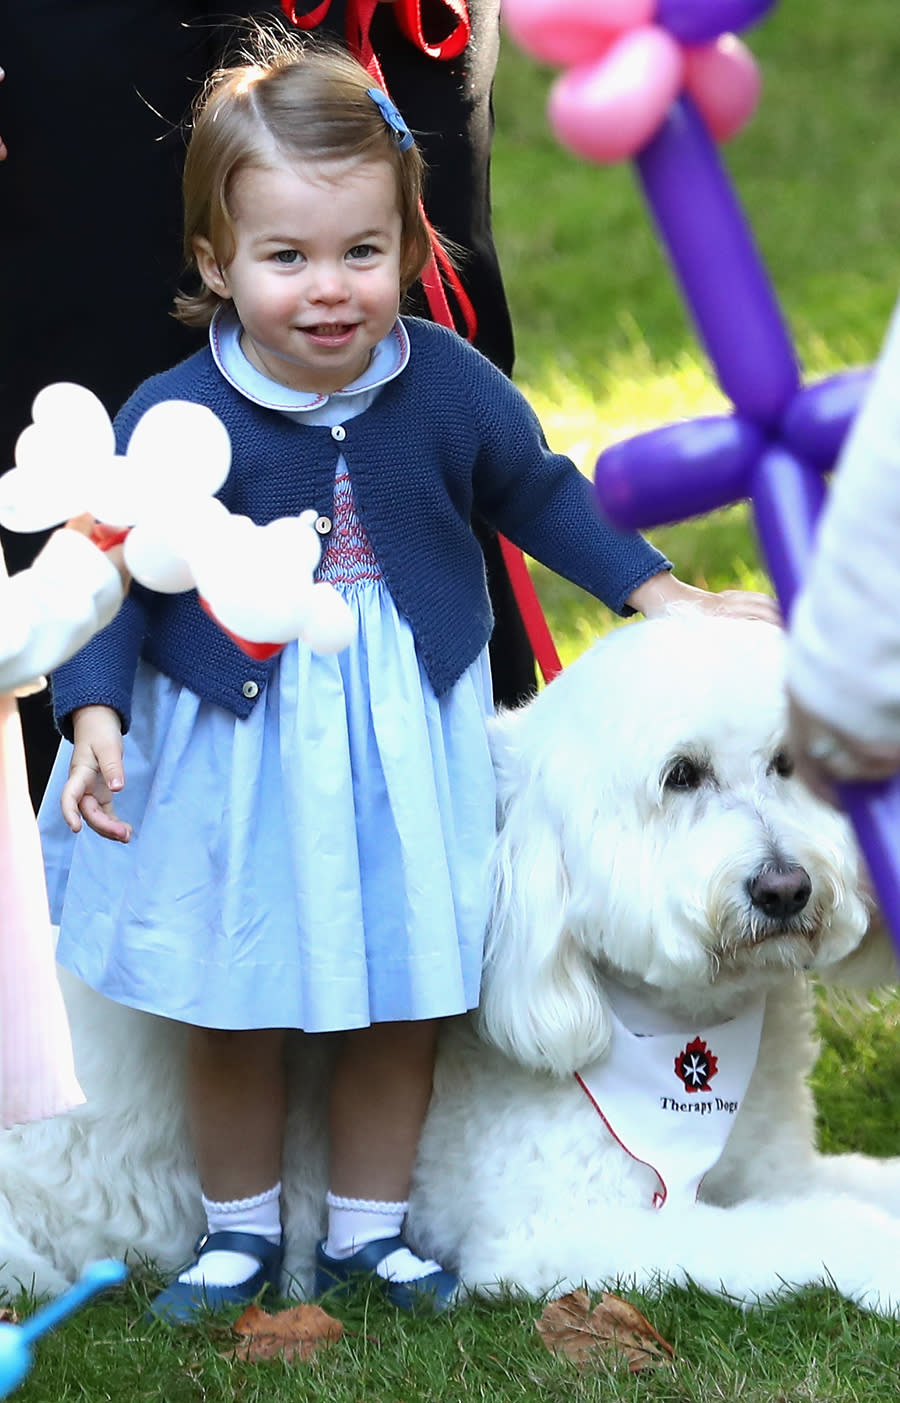 And Princess Charlotte steals our hearts with a smile